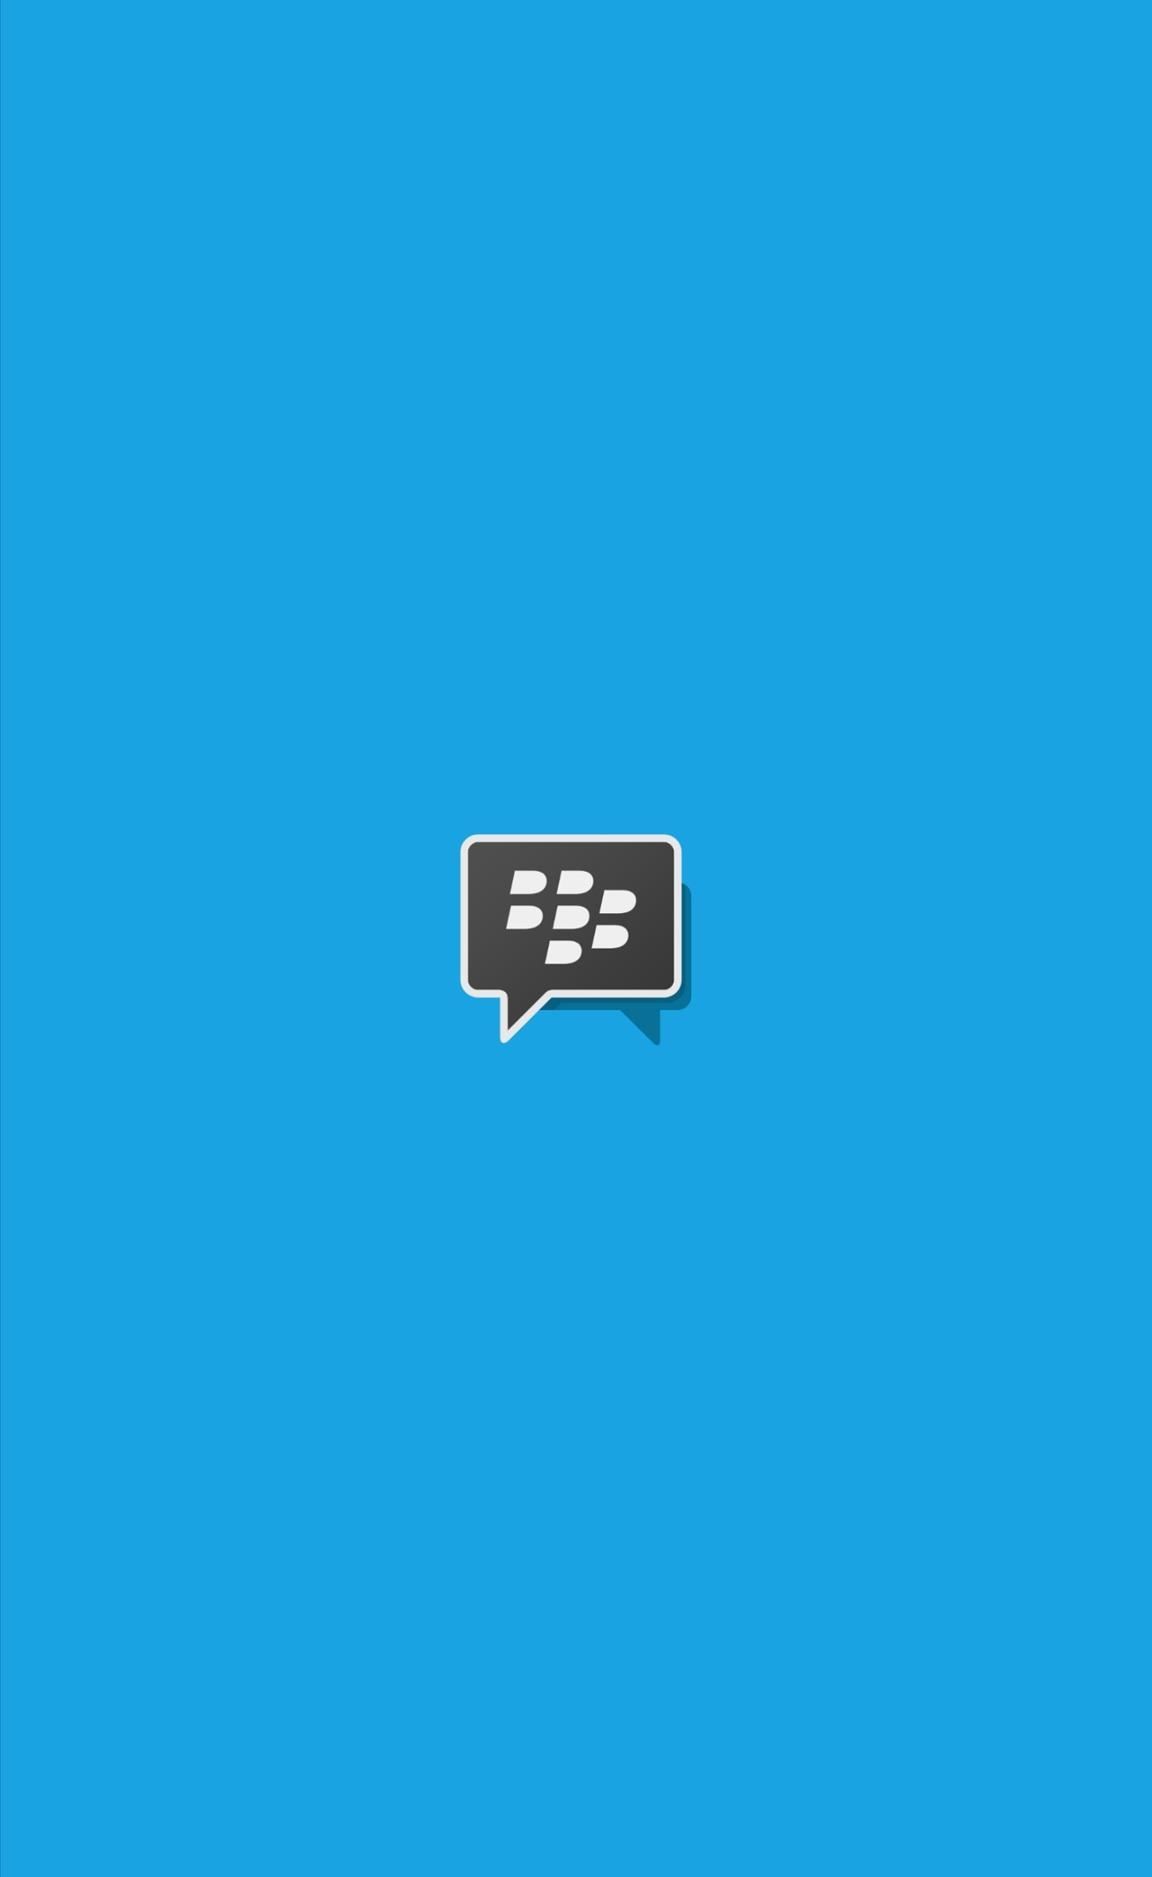 How to Use BlackBerry's Video Calling on Android & iOS